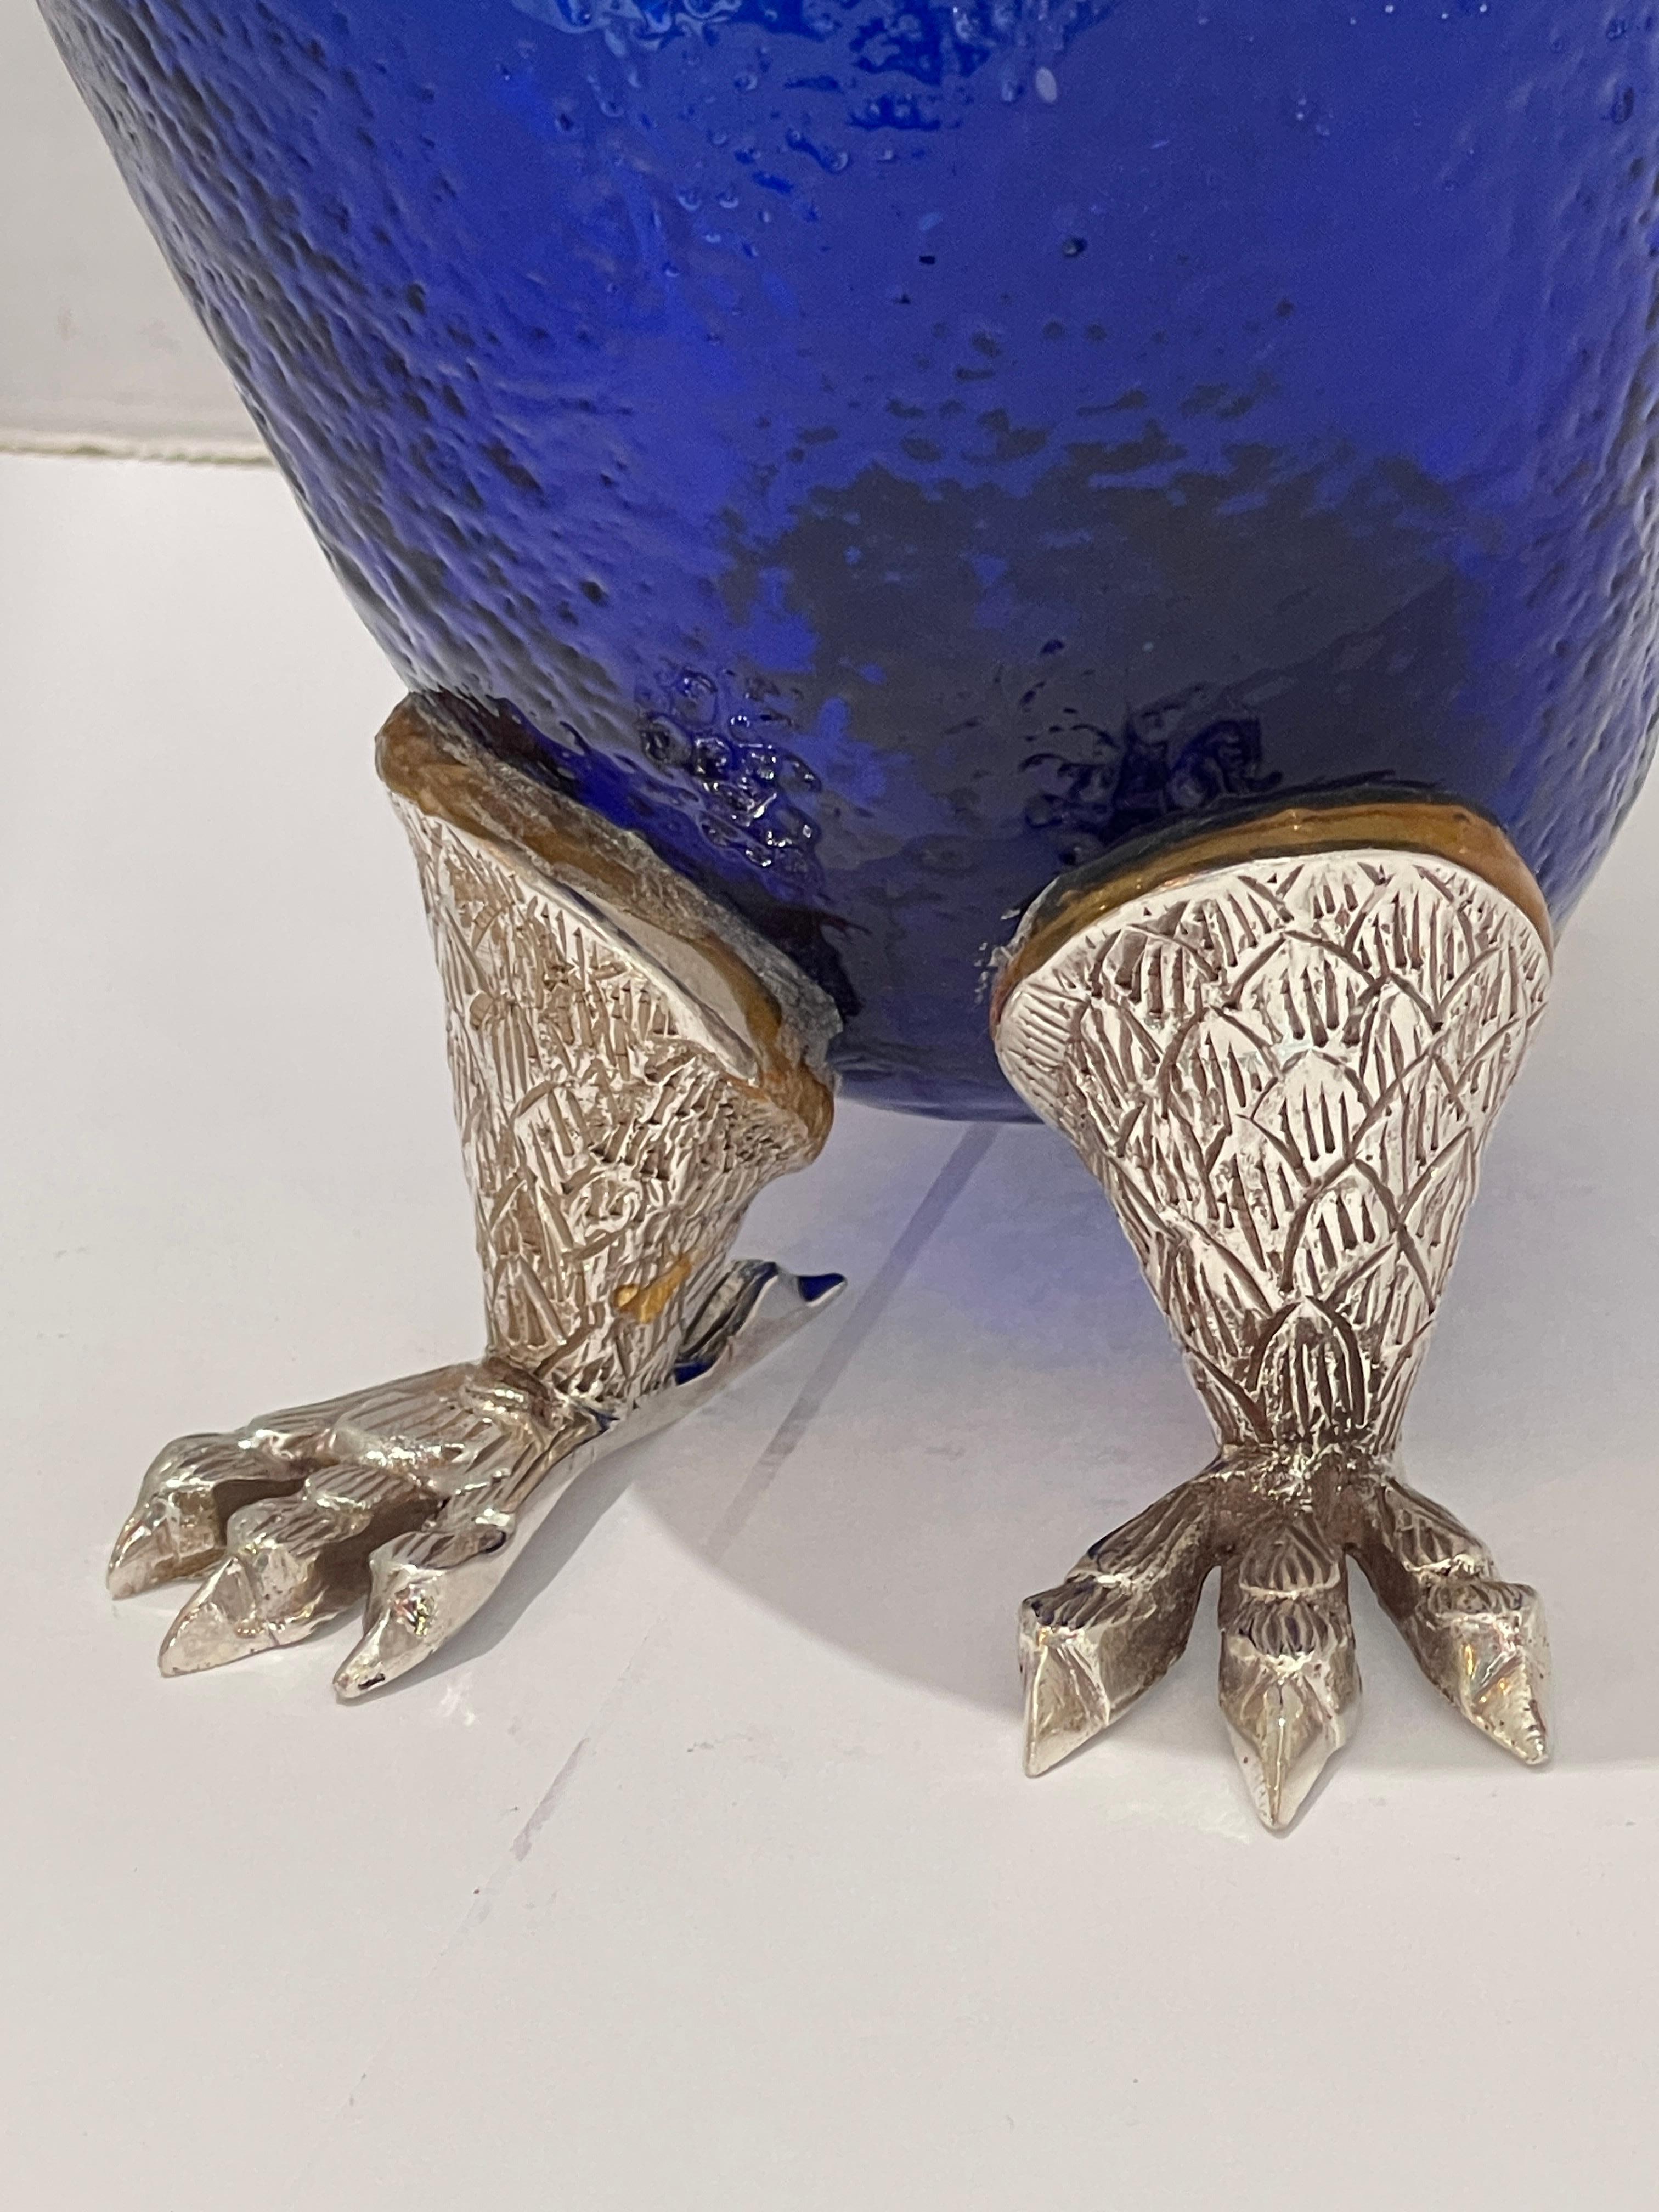 Novelty Silver Plate and Cobalt Blue Glass Owl Claret Jug Decanter 20Th C. For Sale 7